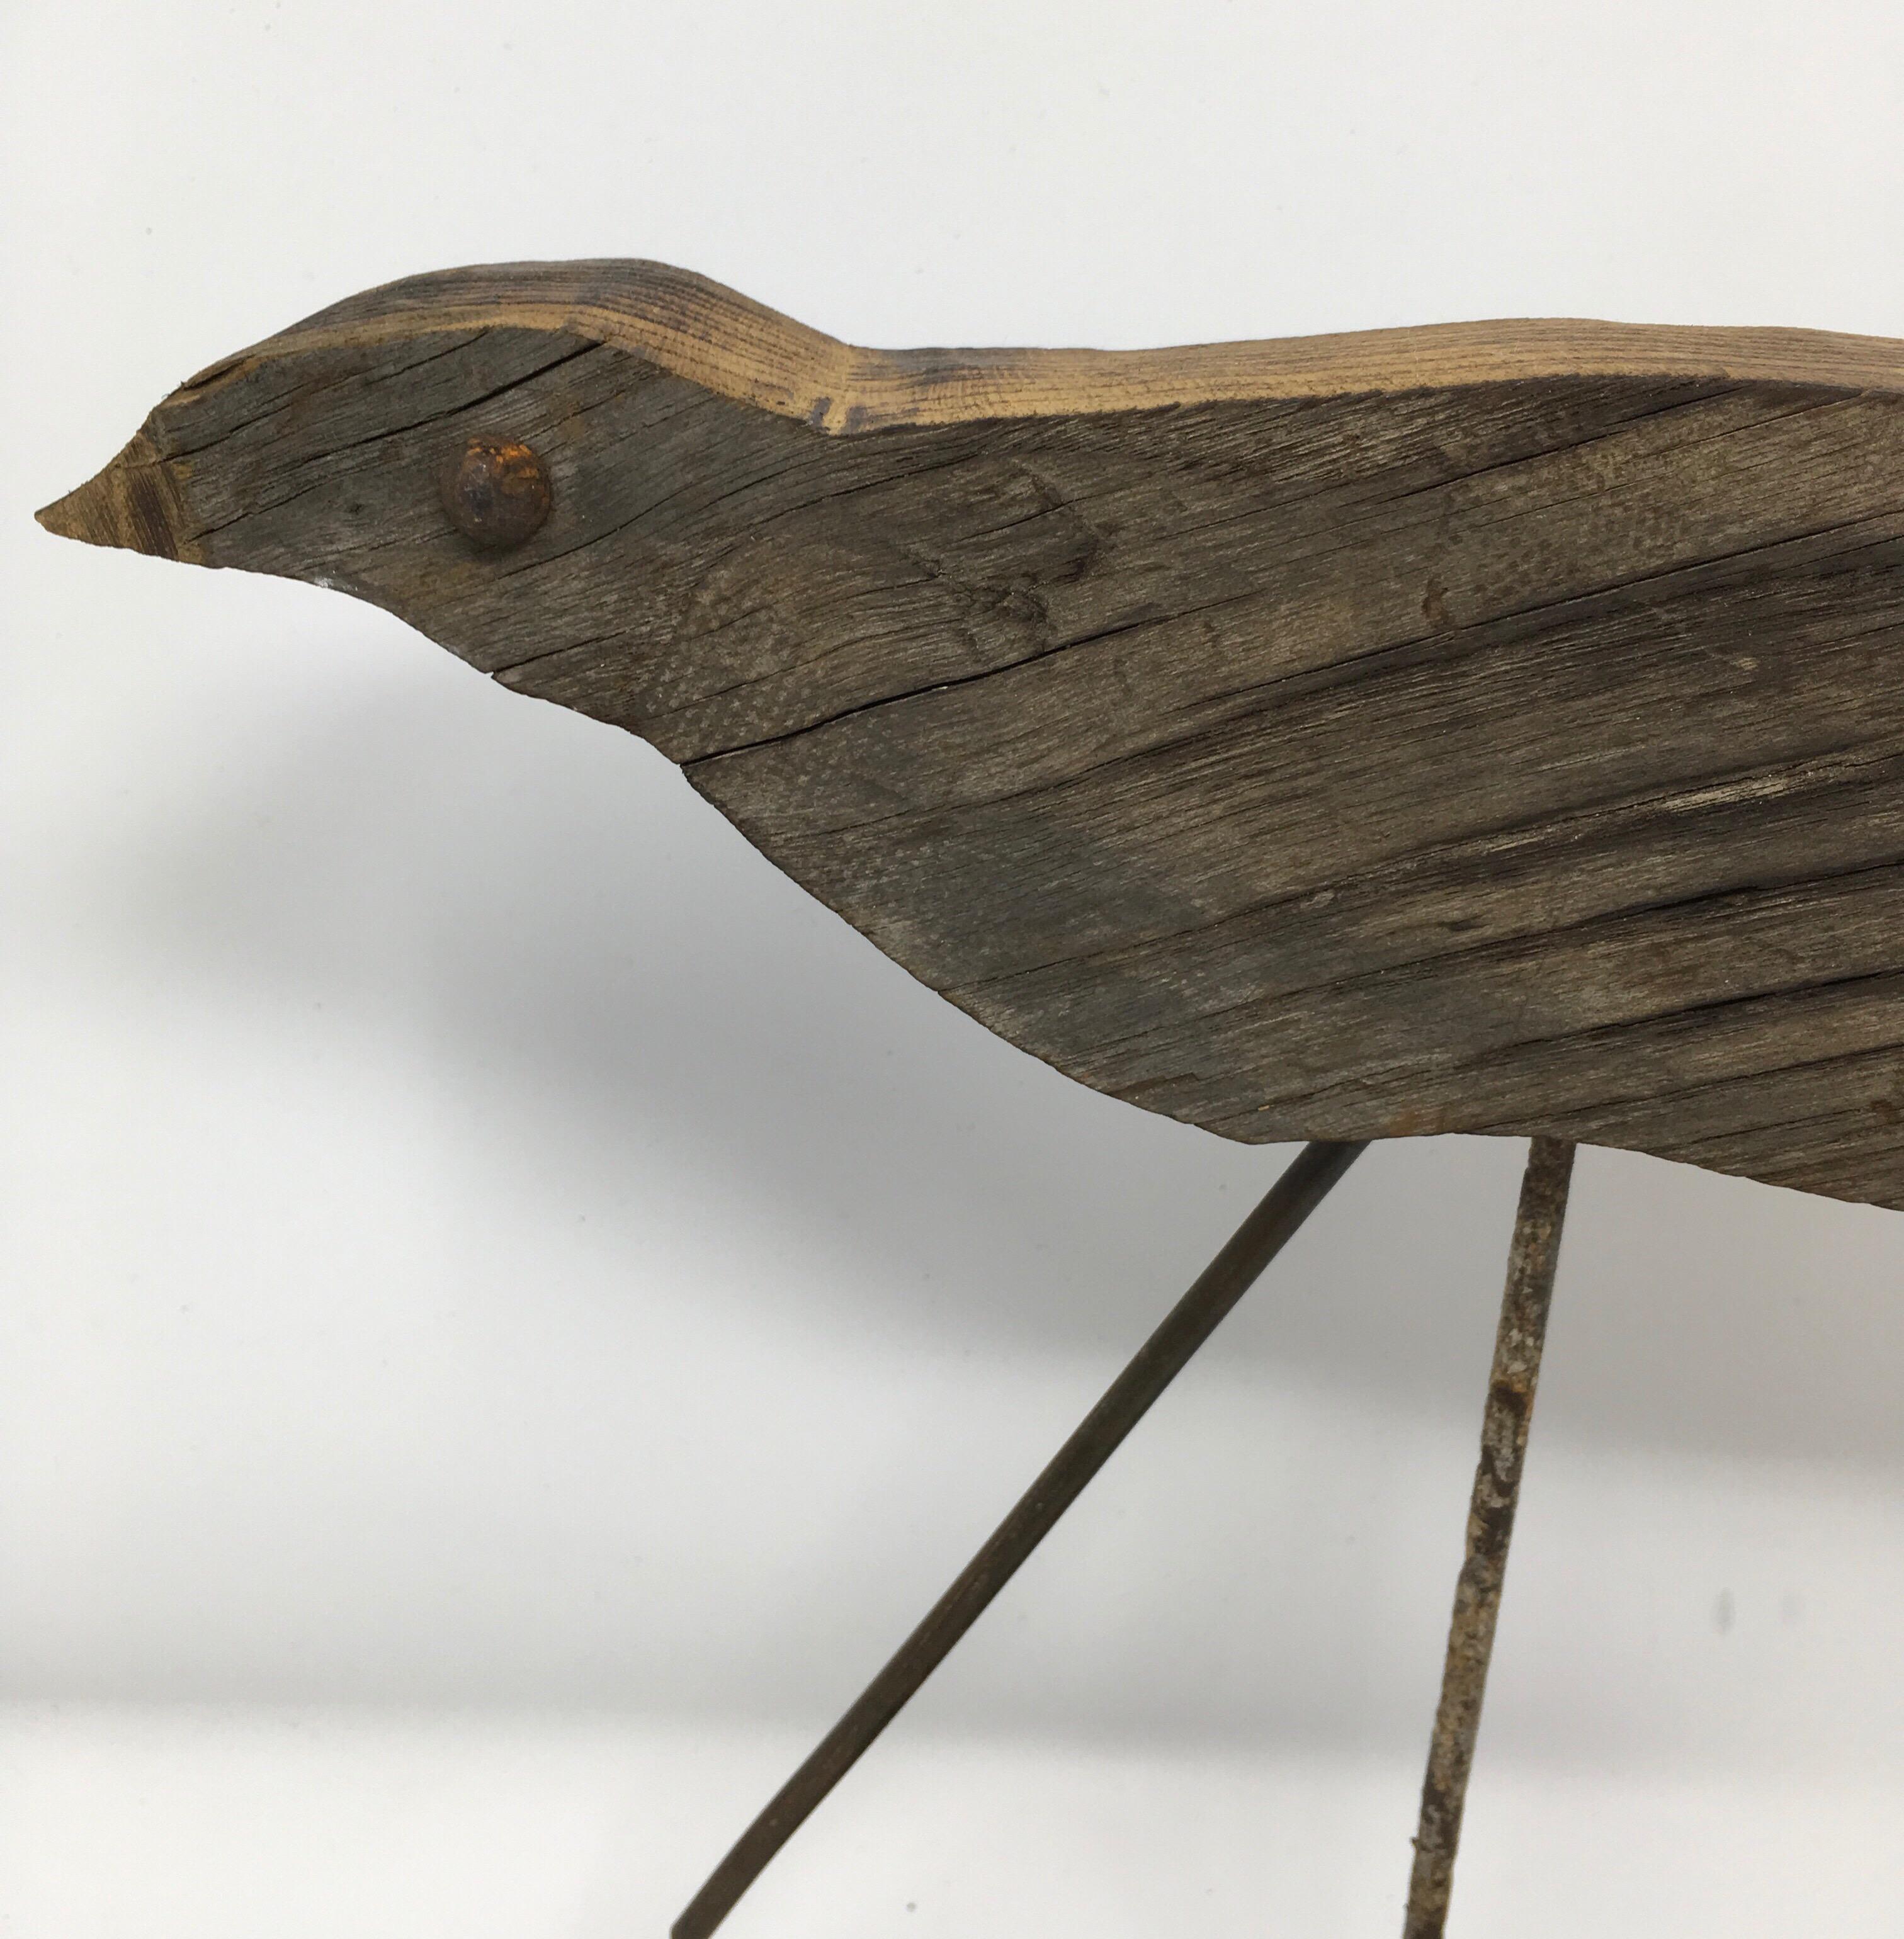 Found in the Provence Region of France, this antique handmade Bird Decoy is mounted on a new custom iron base. The eyes on this decoy are constructed with metal rivets. Today, these types of bird decoys add interest displayed on tables and